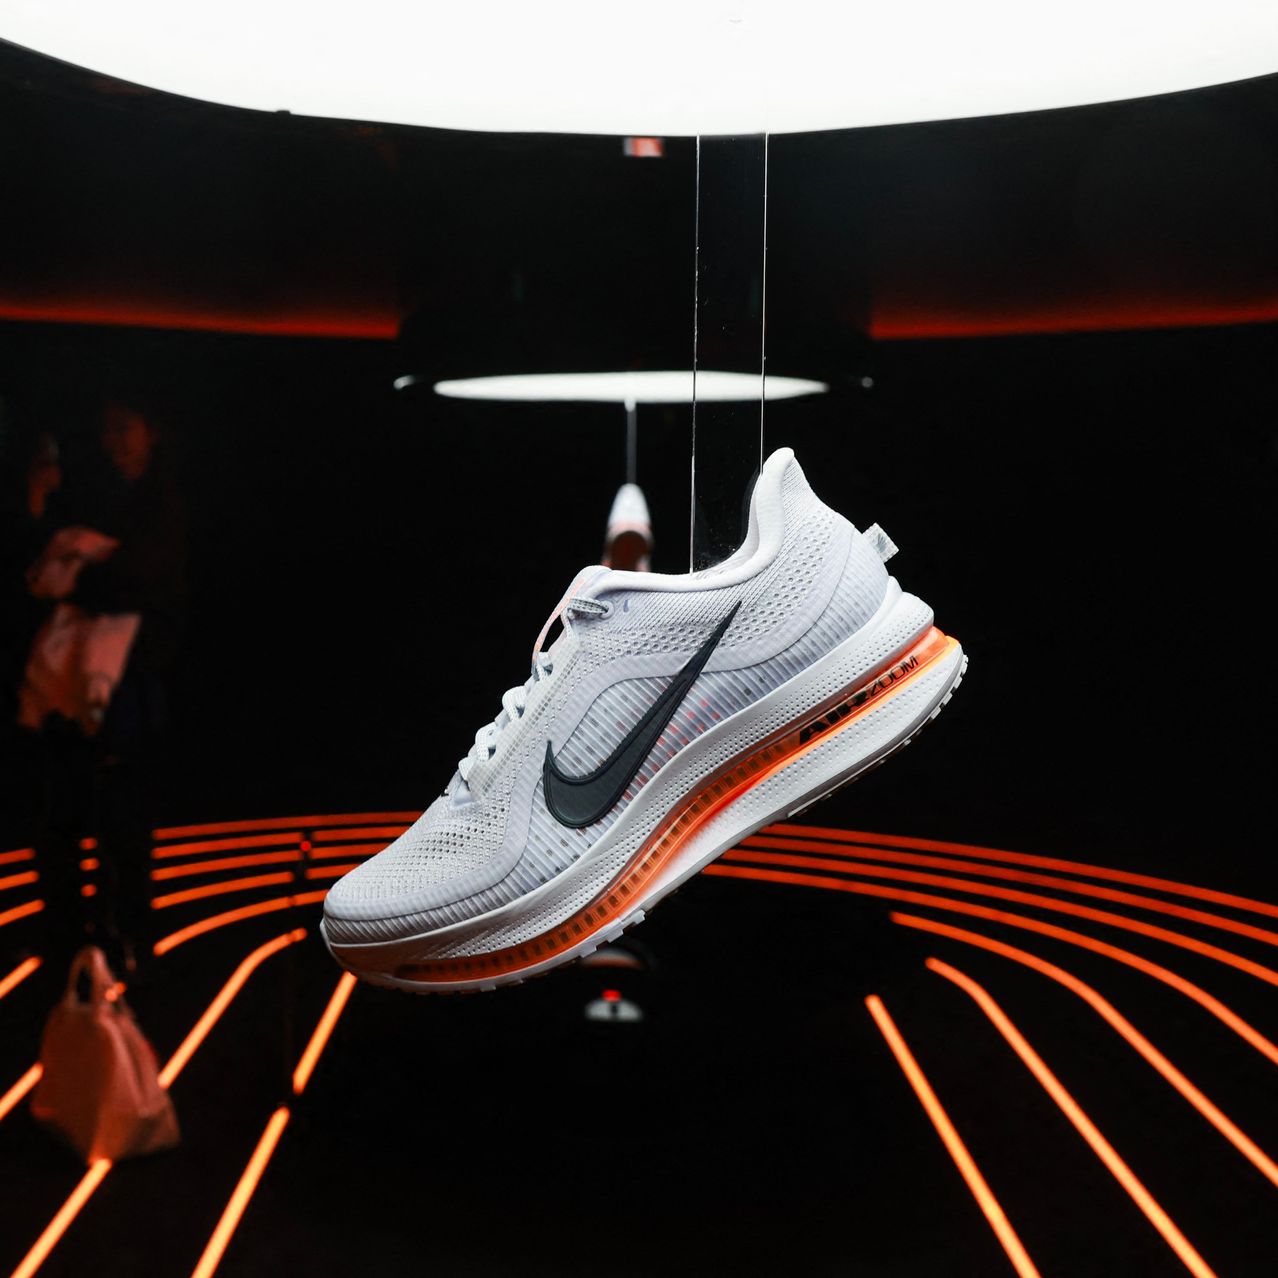 nike reverses course as innovation stalls and rivals gain ground